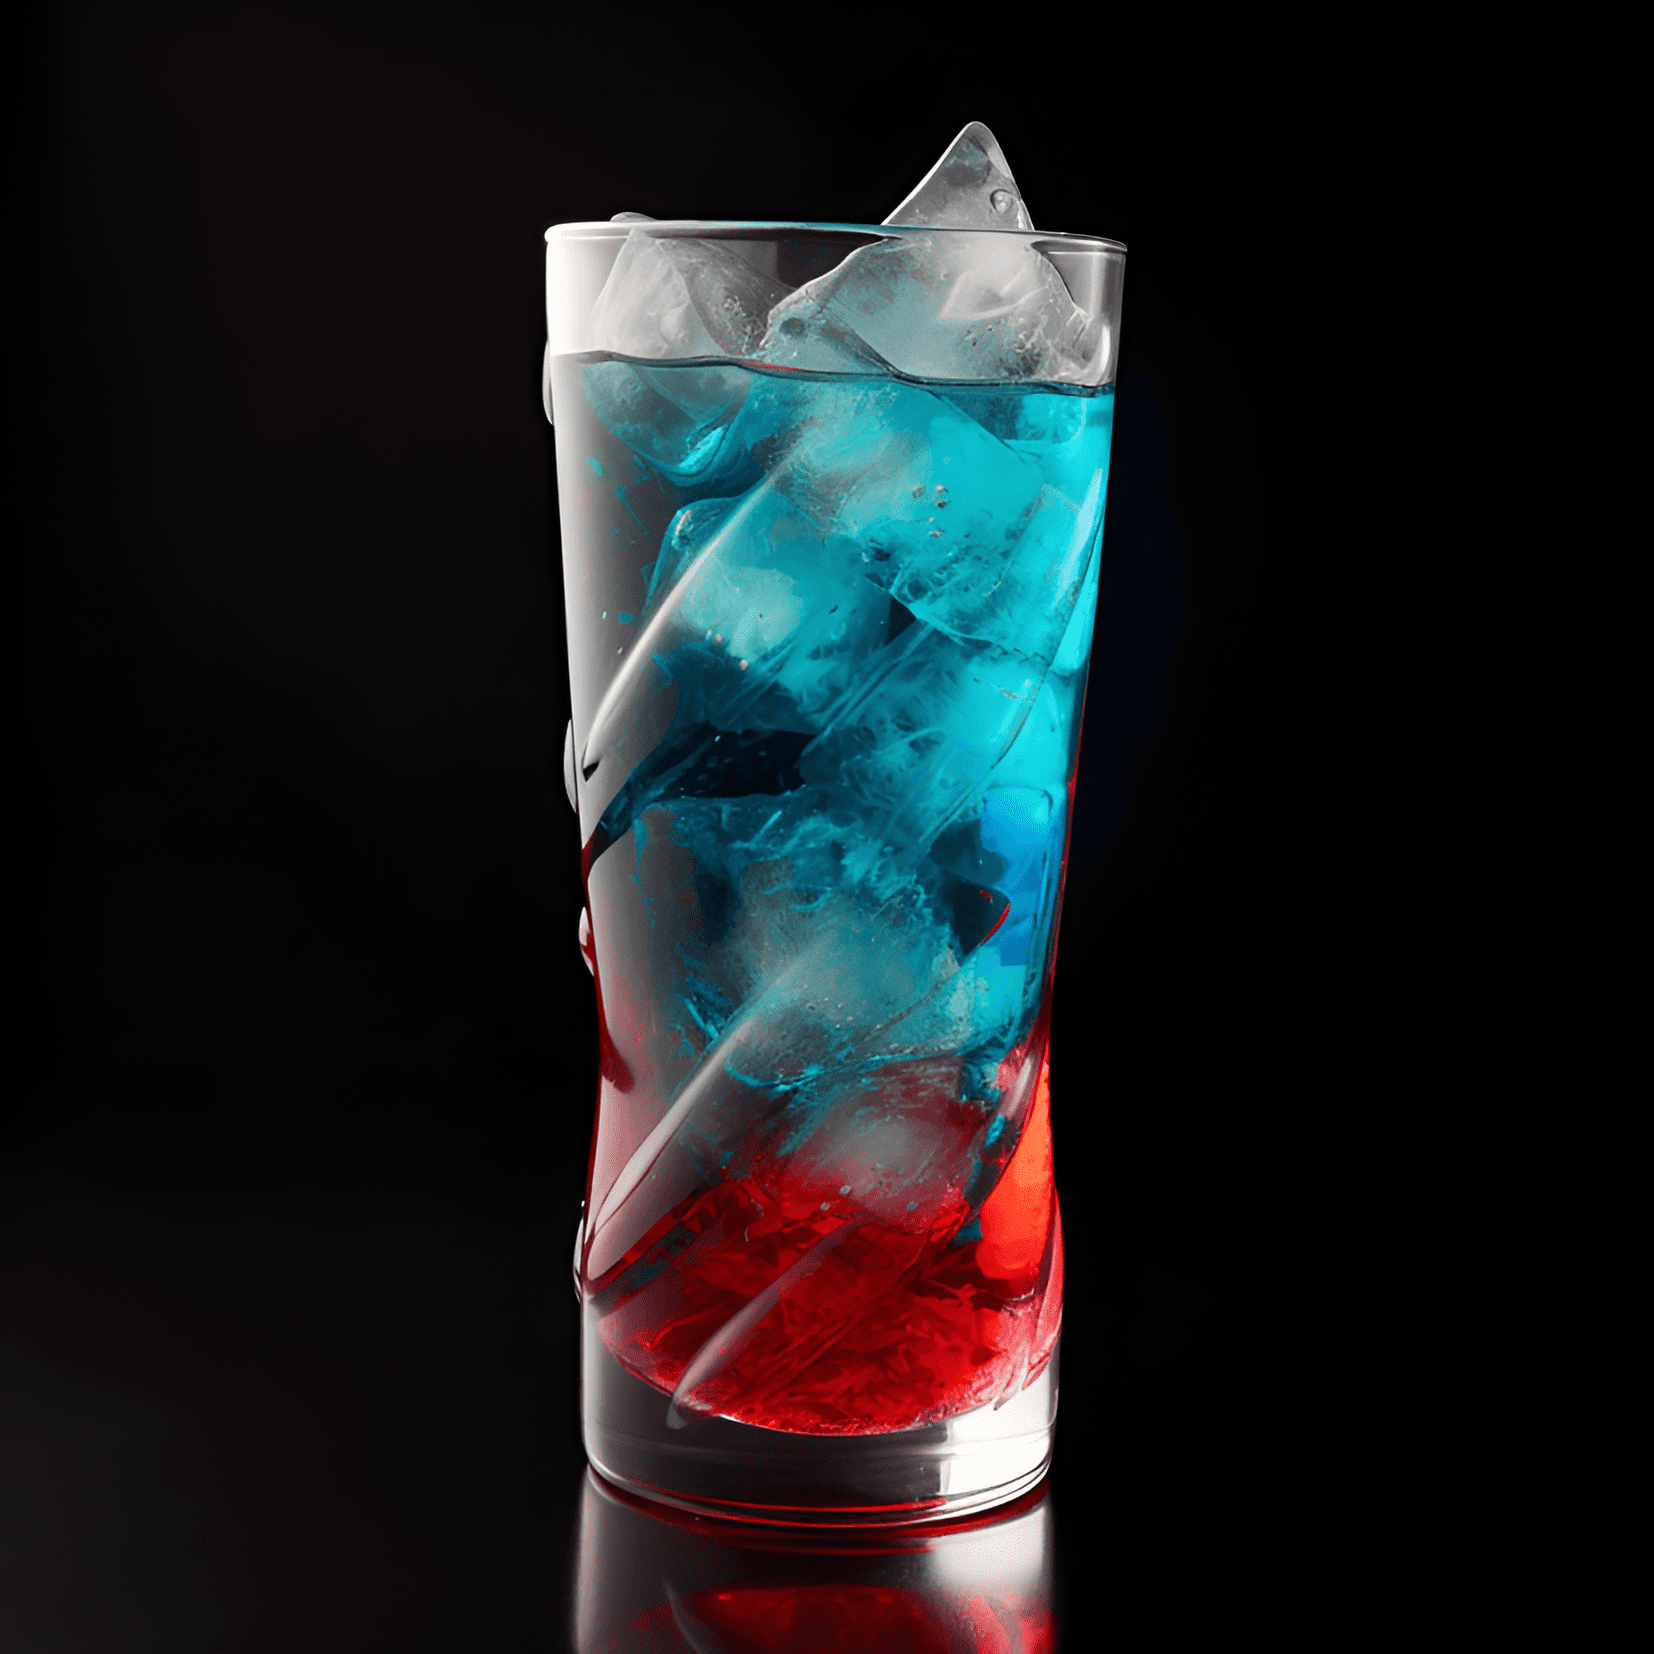 Shark Bite Cocktail Recipe - The Shark Bite cocktail offers a delightful combination of sweet, sour, and fruity flavors. The orange and pineapple juices provide a tropical sweetness, while the sour mix adds a tangy twist. The blue curaçao gives the drink its signature ocean blue color and a hint of citrus, while the spiced rum adds warmth and depth.